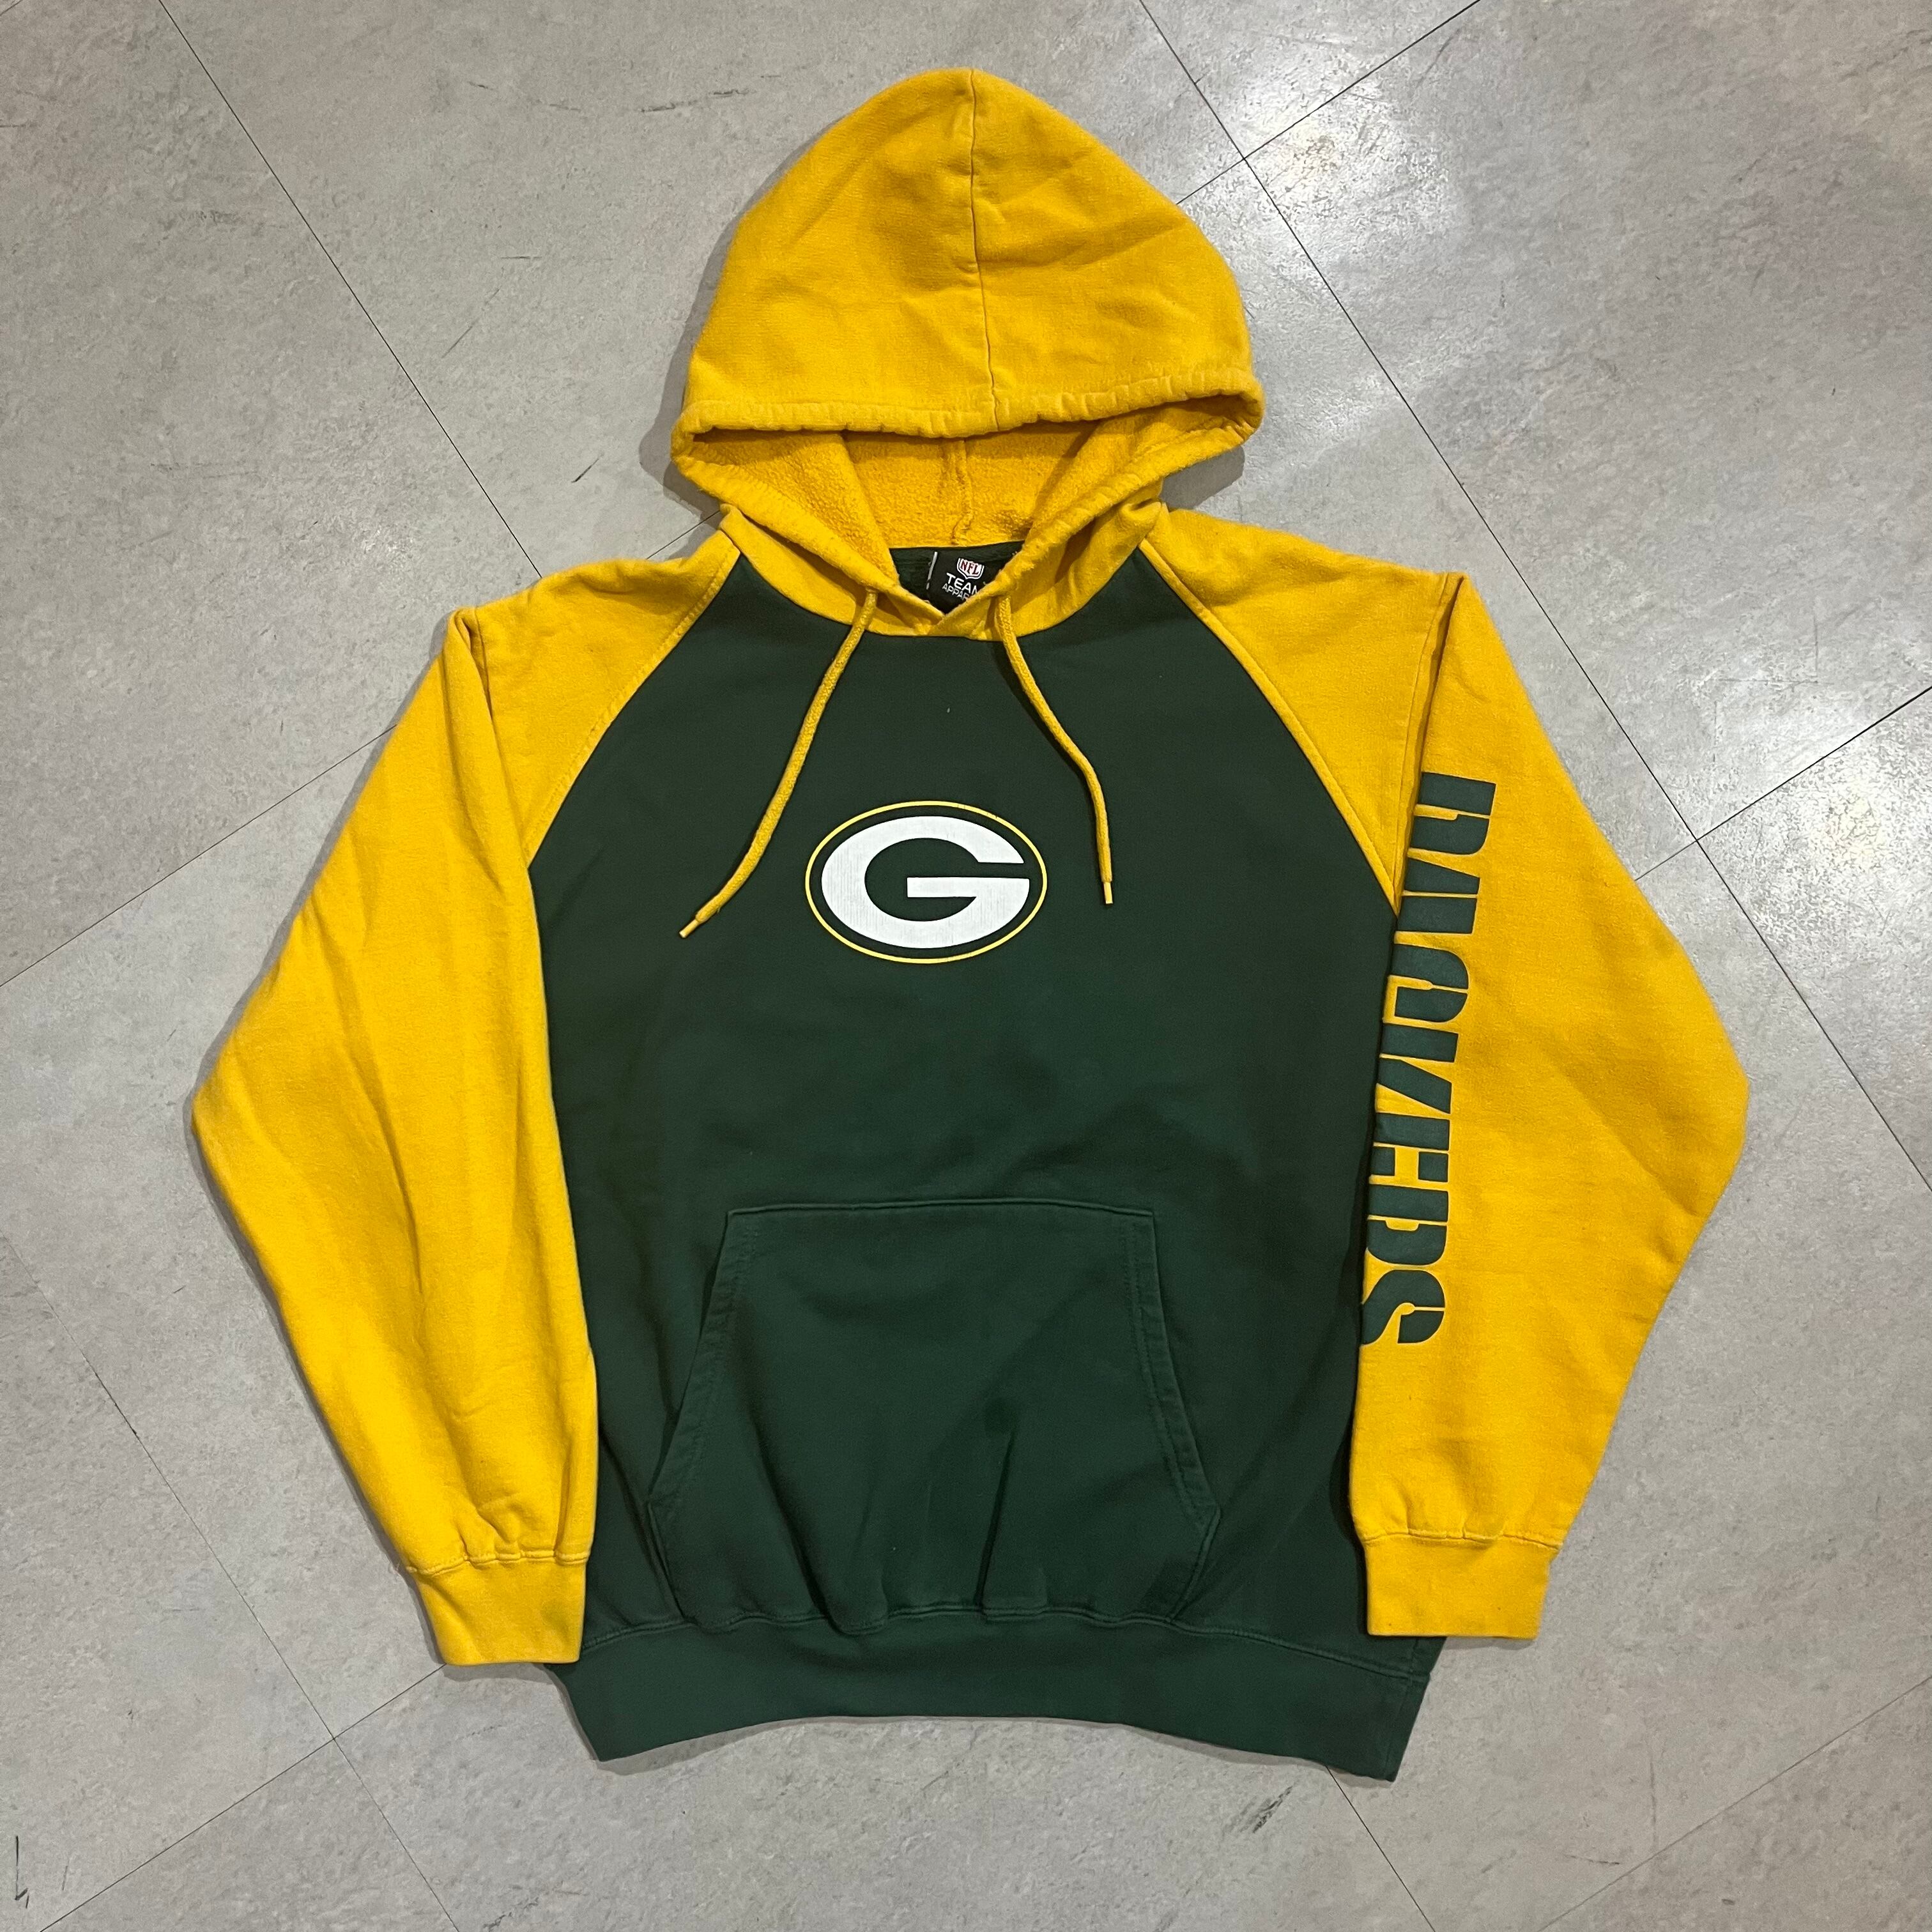 size: L 【 NFL 】PACKERS パッカーズ パーカー 緑 黄色 ロゴパーカー